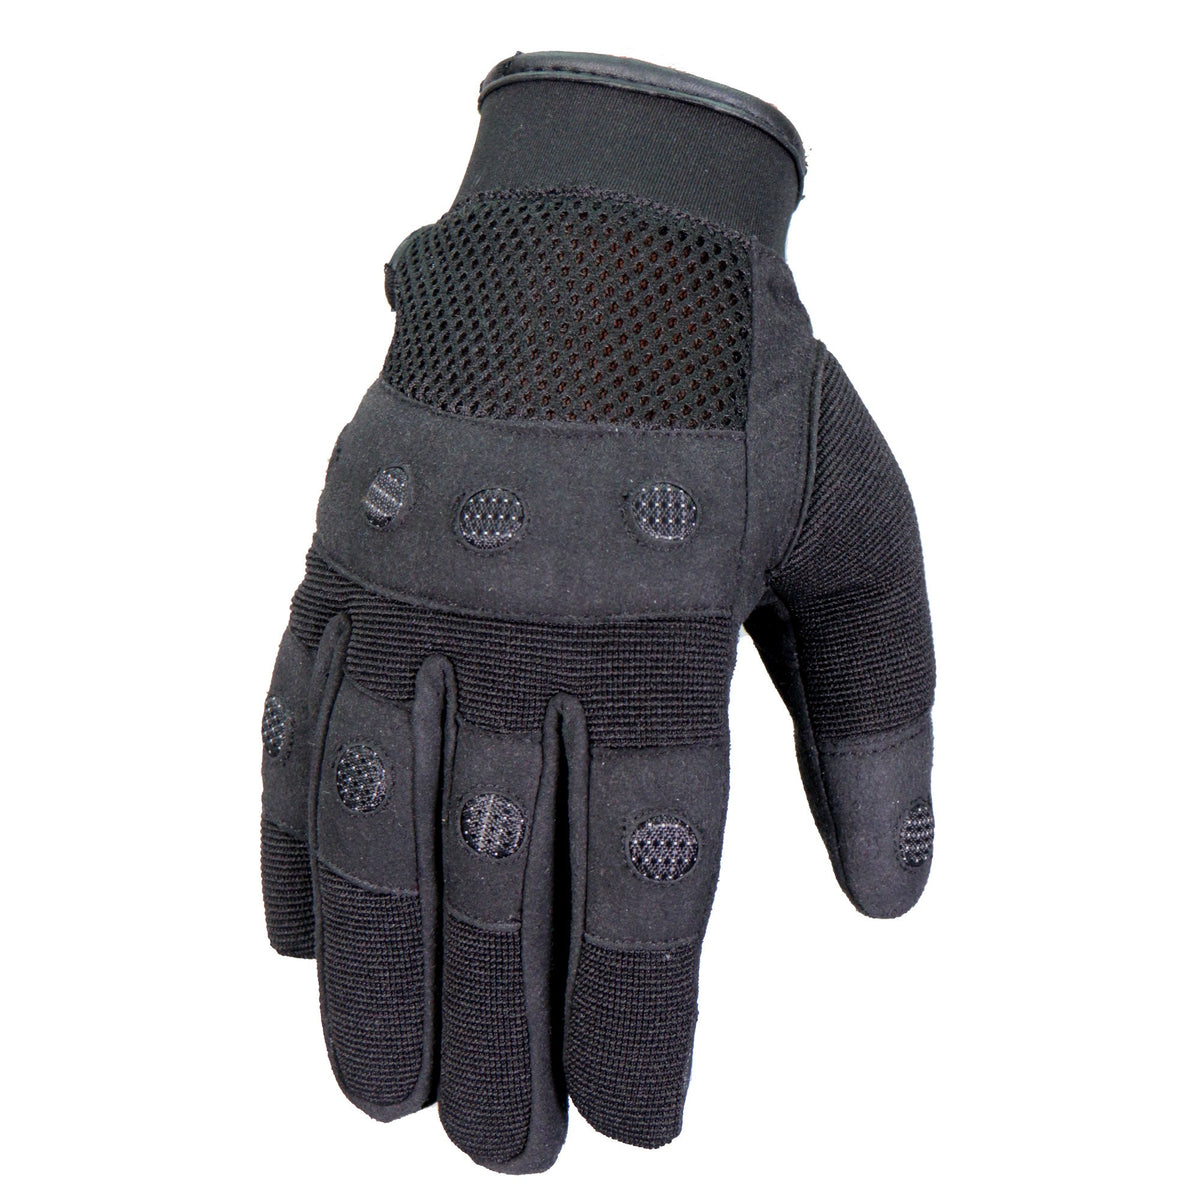 Hot Leathers Padded Knuckle Mechanic Gloves